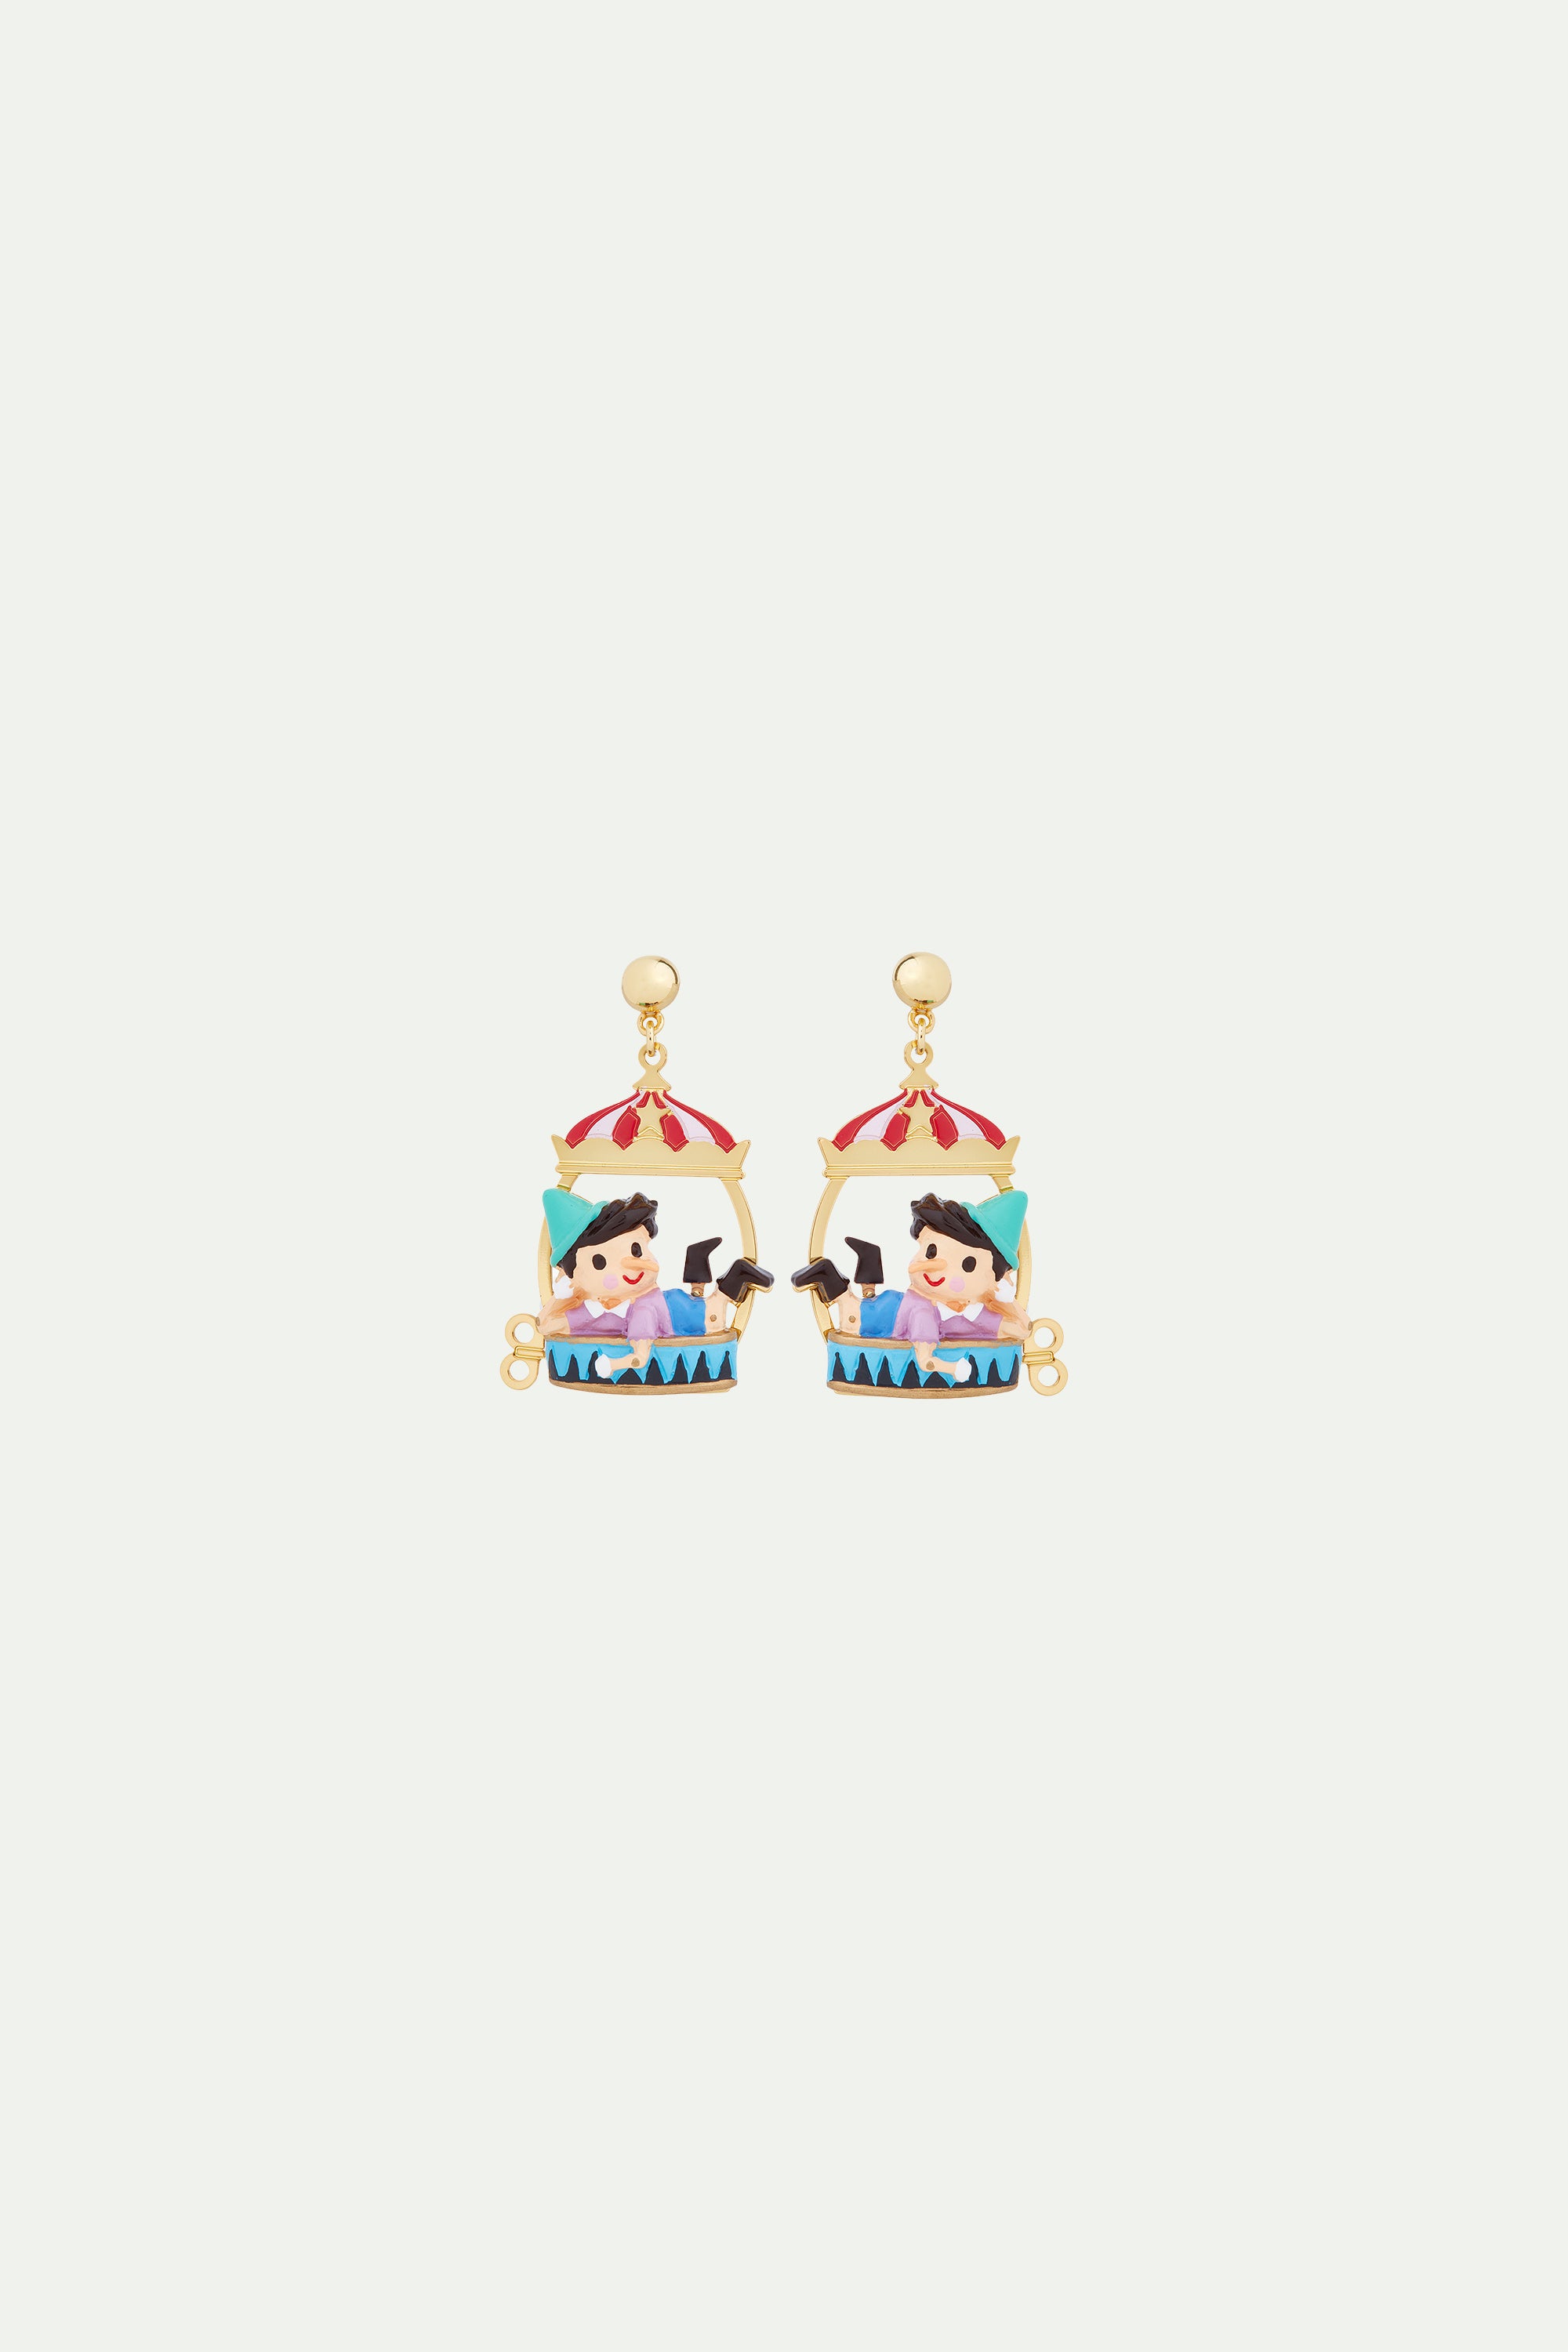 Pinocchio and circus tent clip-on earrings